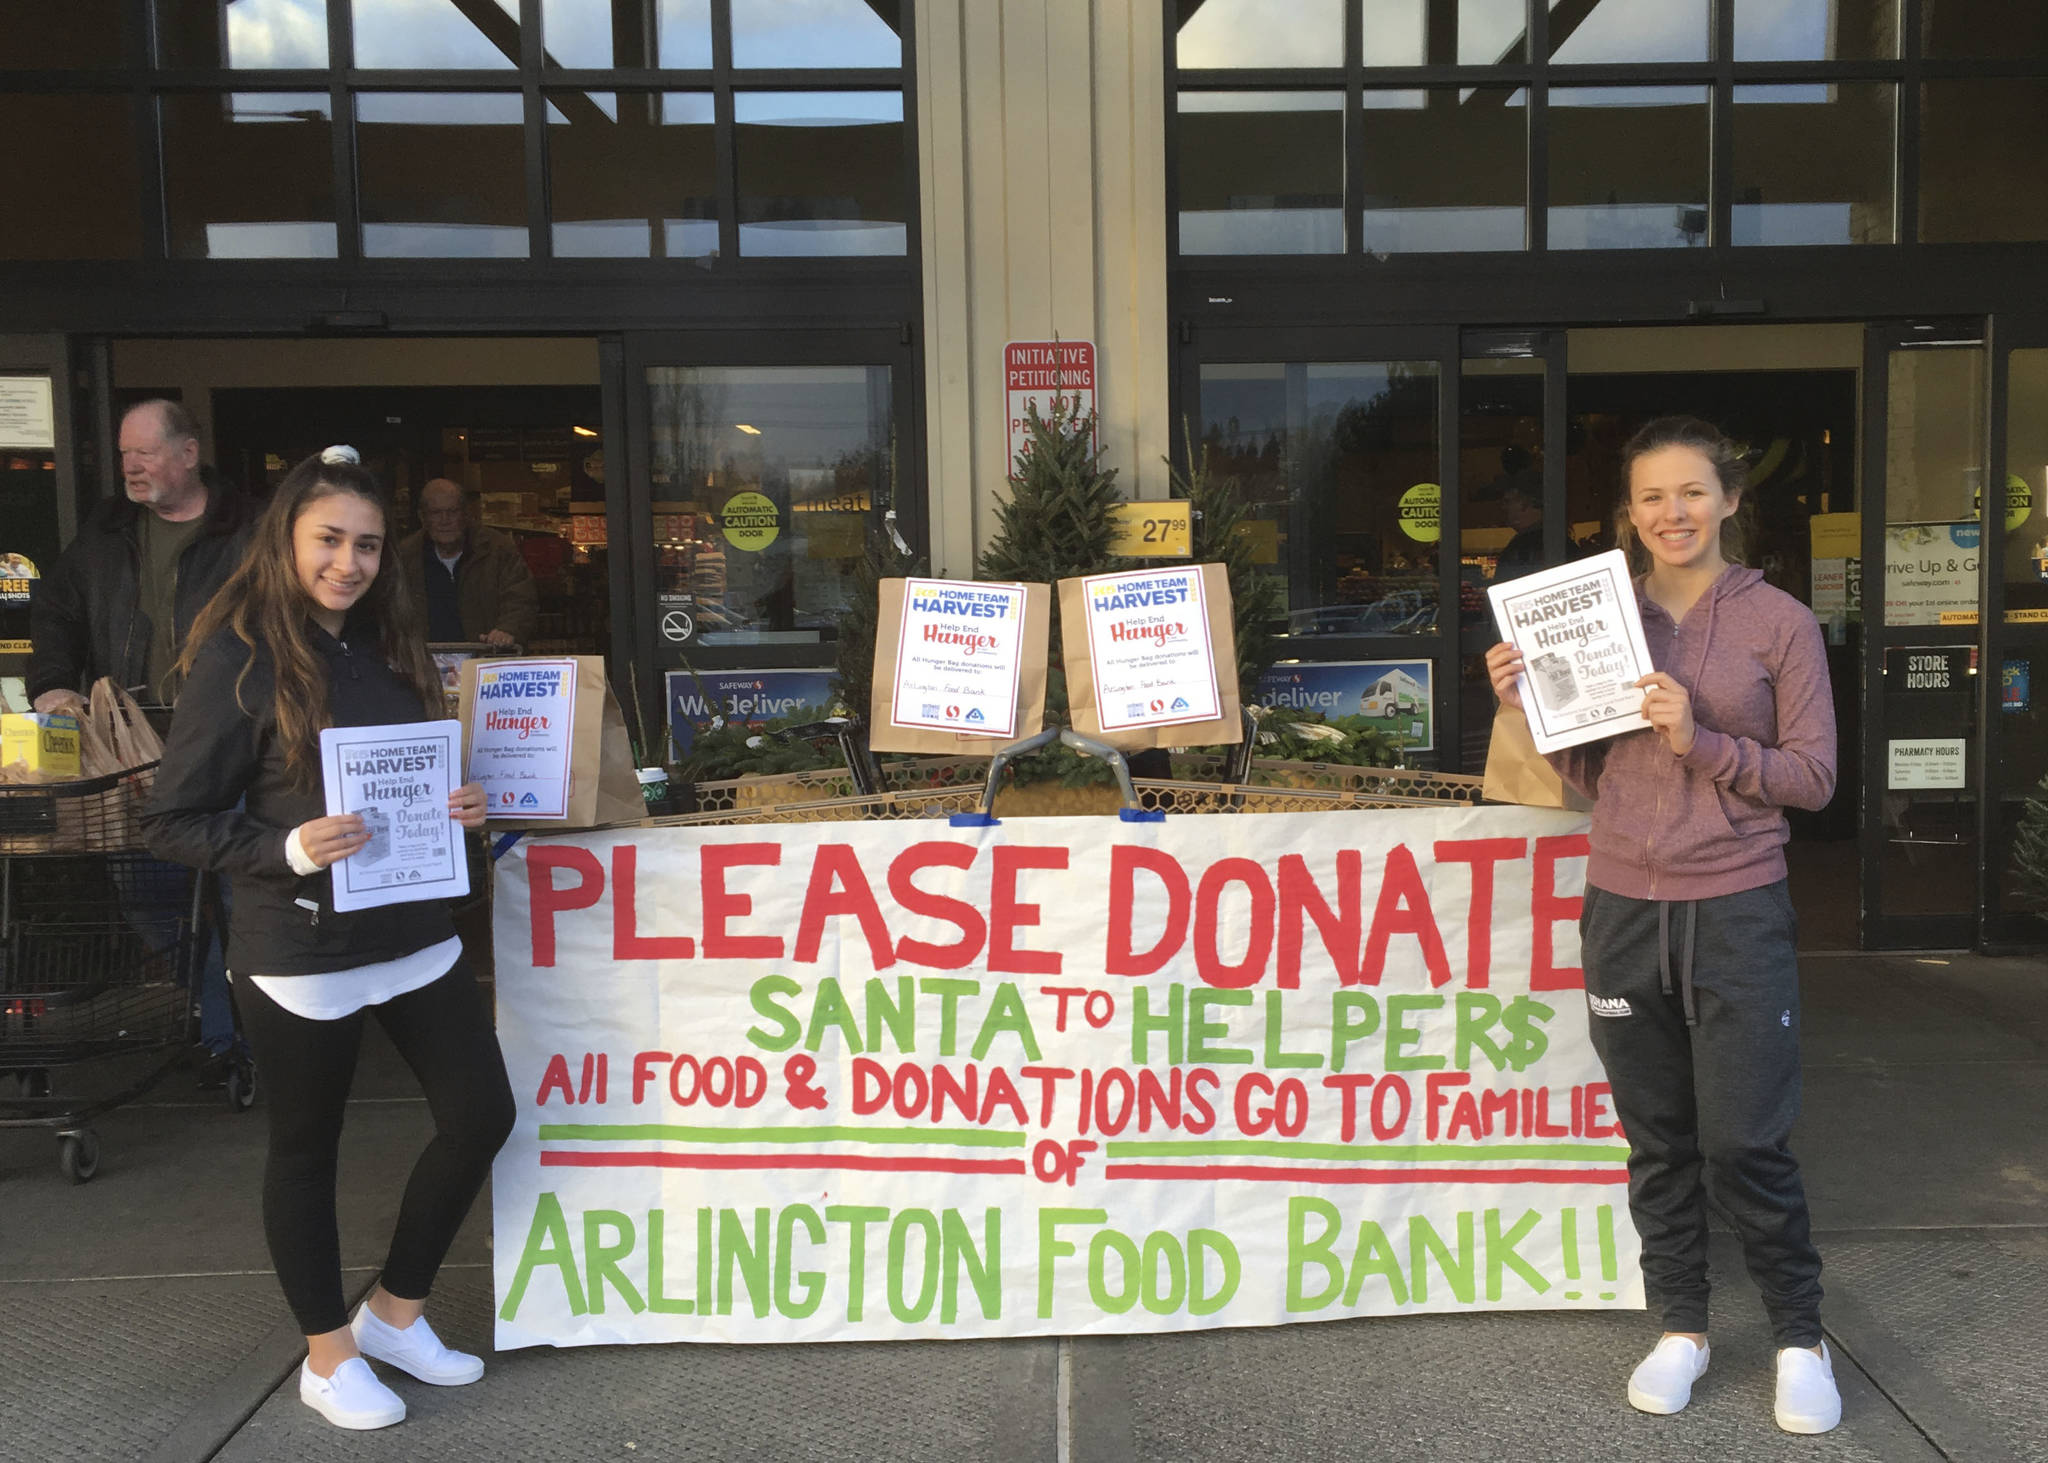 Arlington High School DECA students Amari Garrissey (left) and Amelia Hale are Santa’s Helpers volunteering outside the Arlington Safeway store to collect food, toys and donations for families in need during the holidays.